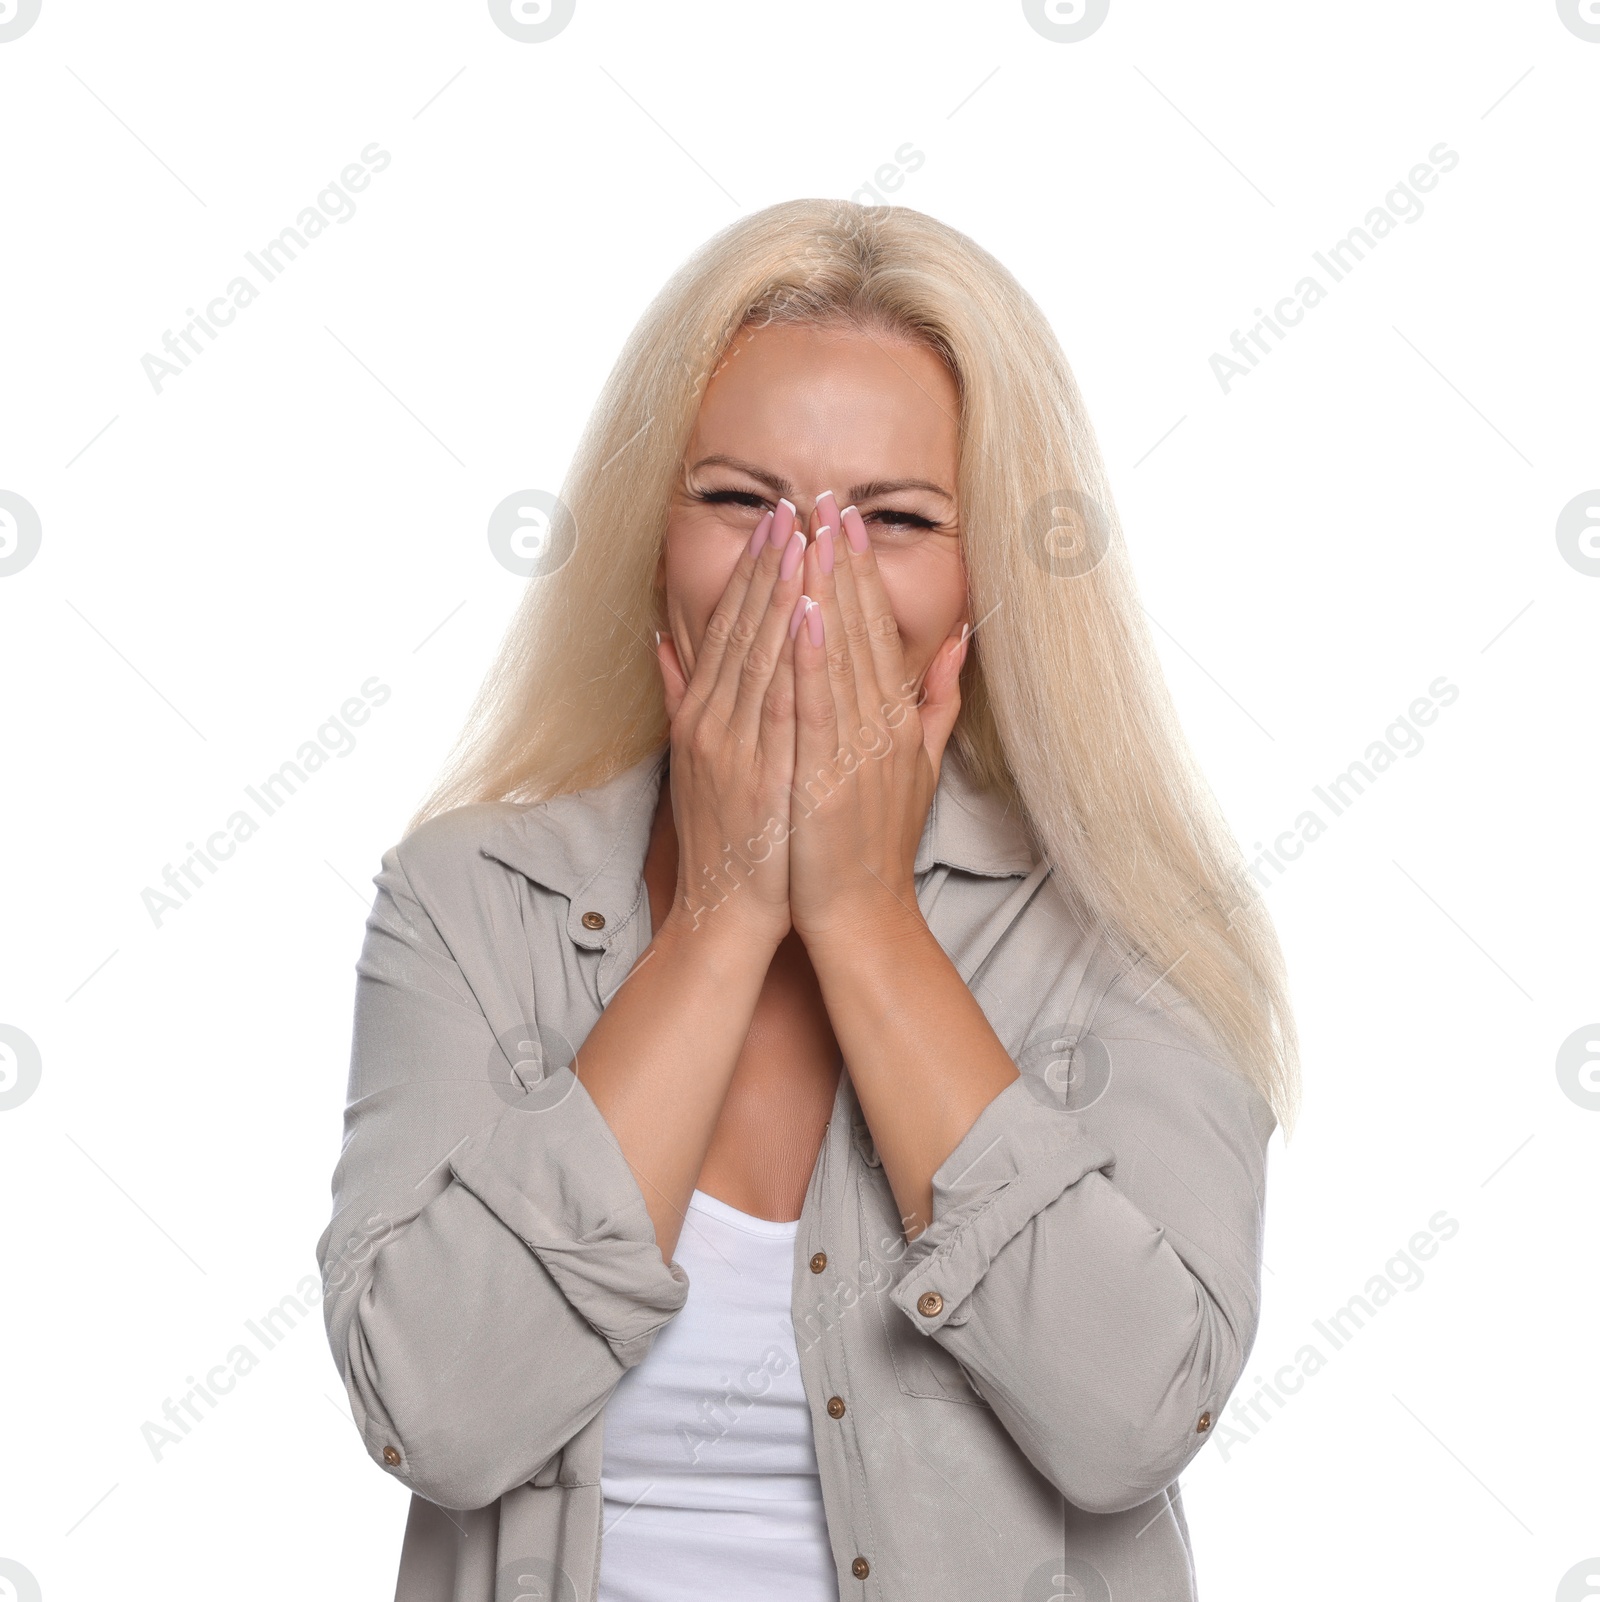 Photo of Embarrassed woman covering mouth with hands on white background